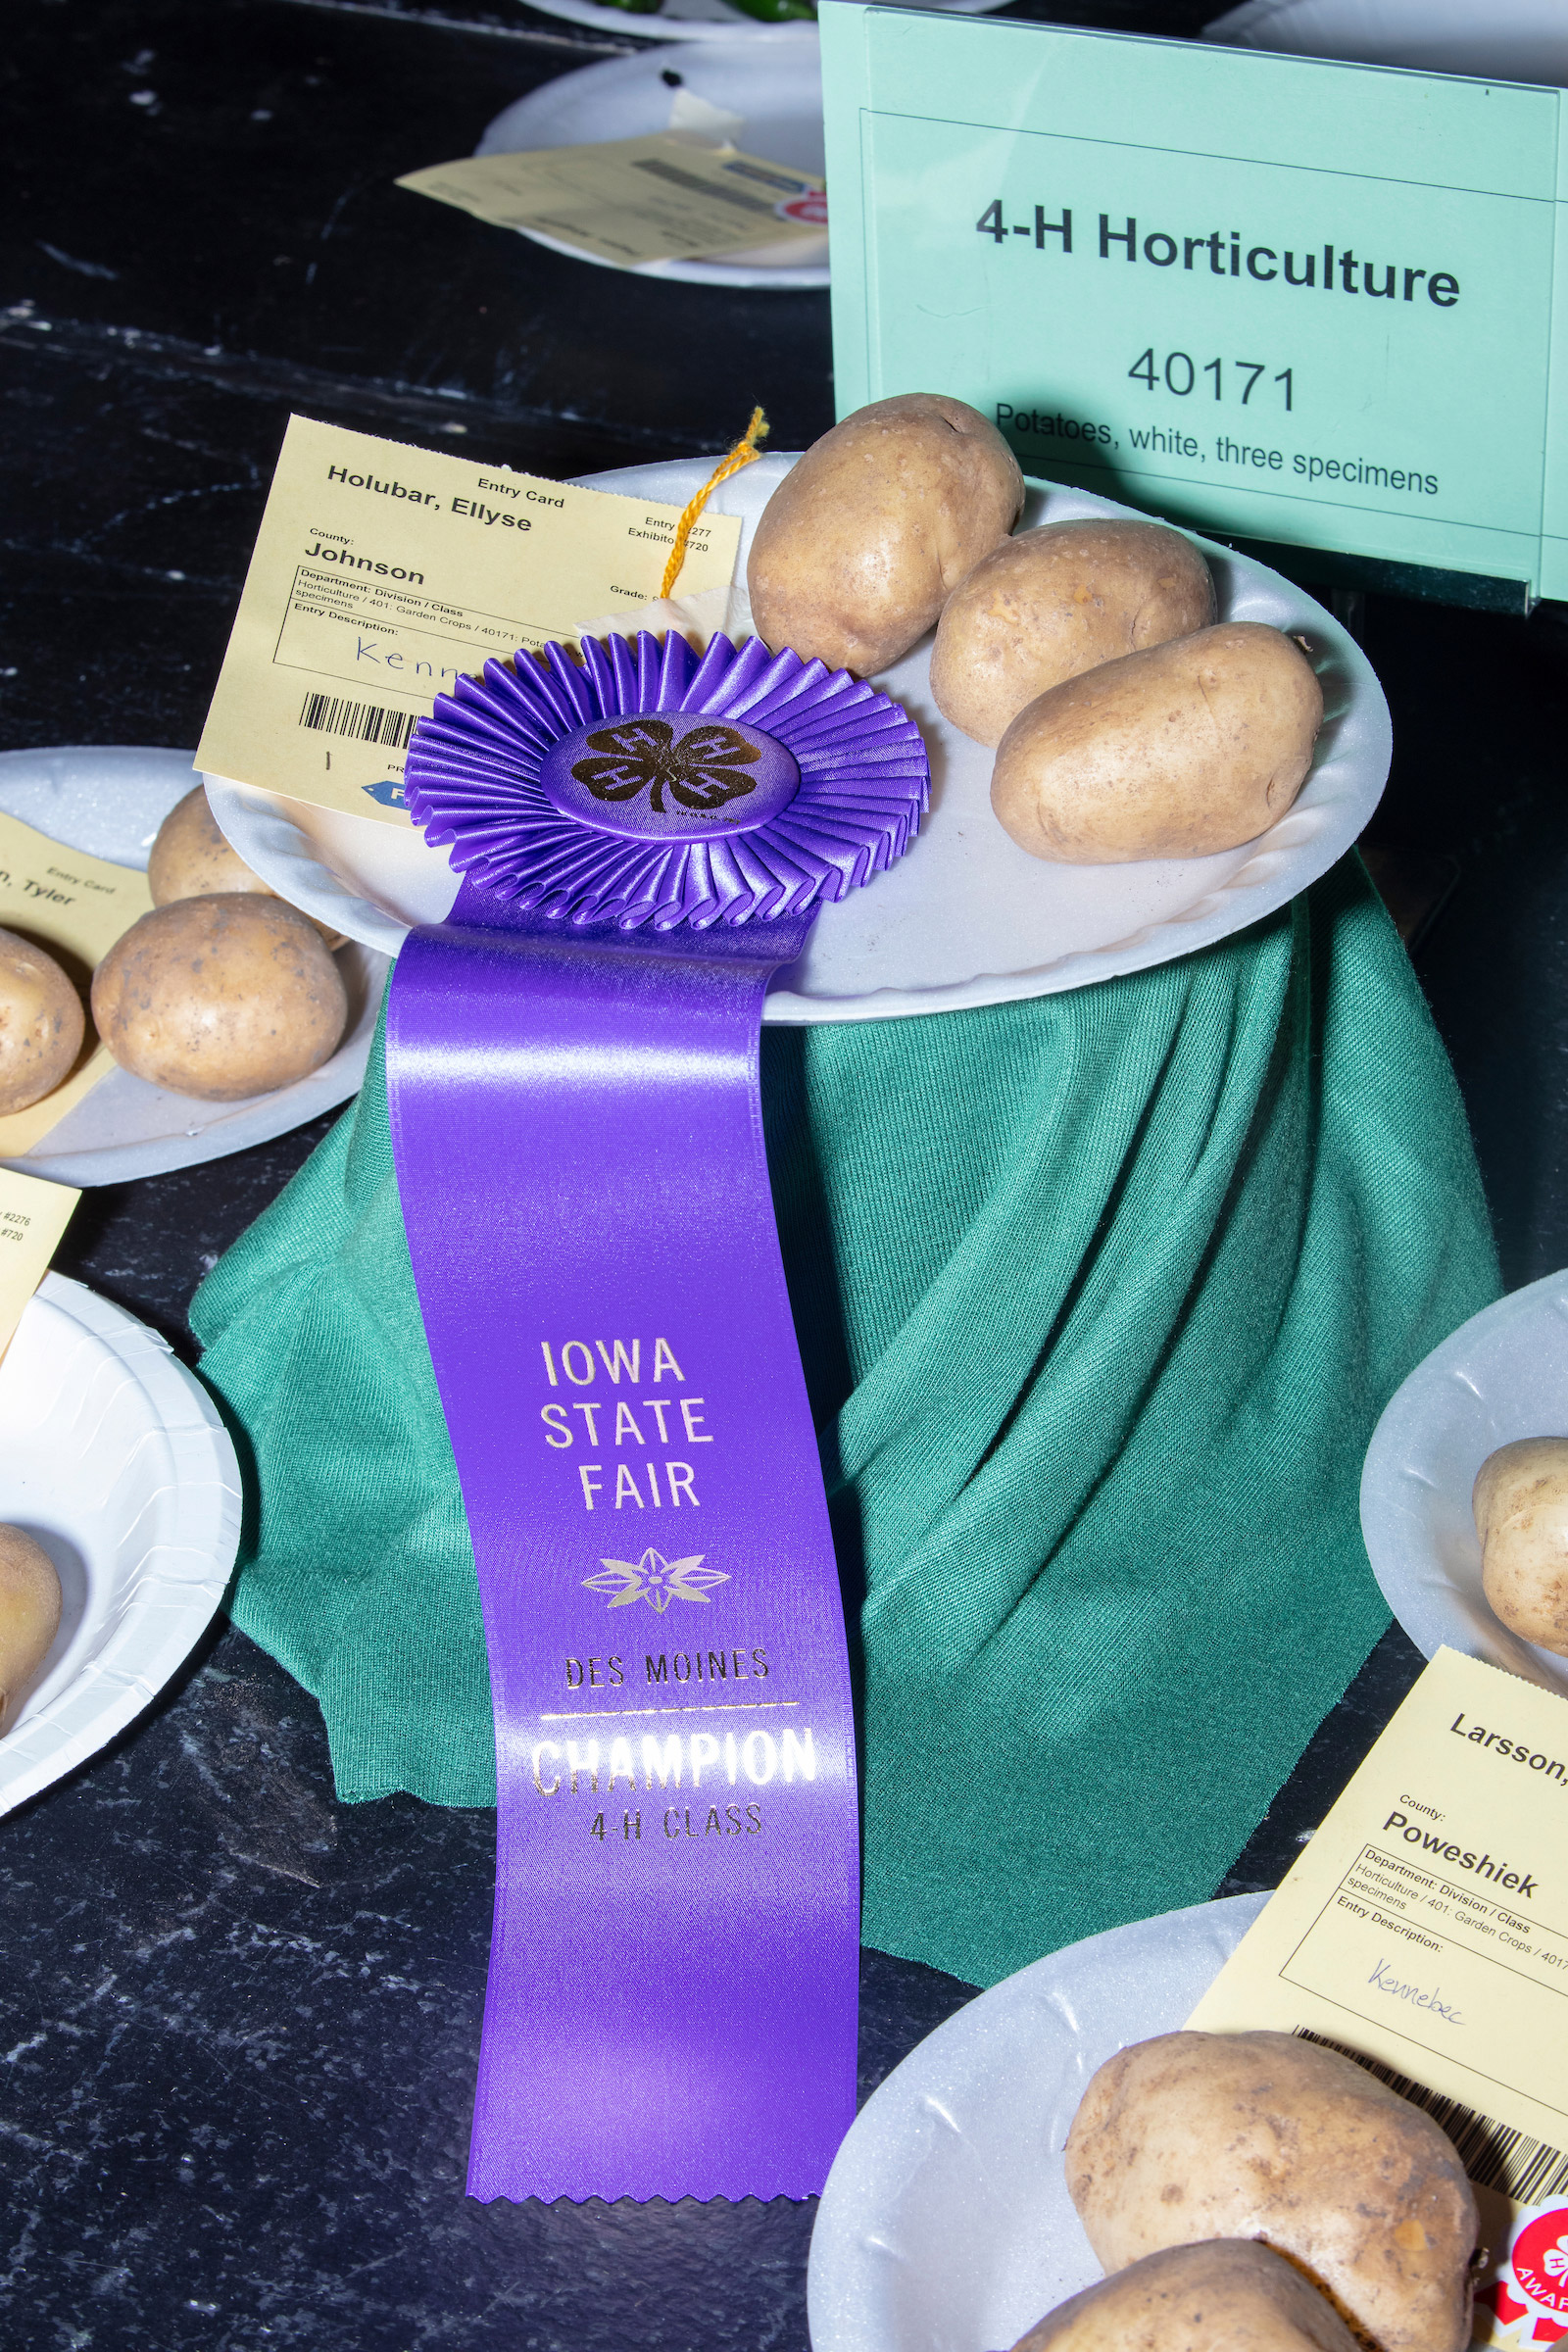 Champion potatoes were on display in the Agriculture Building at the Iowa State Fair on Sat., Aug. 10, 2019.